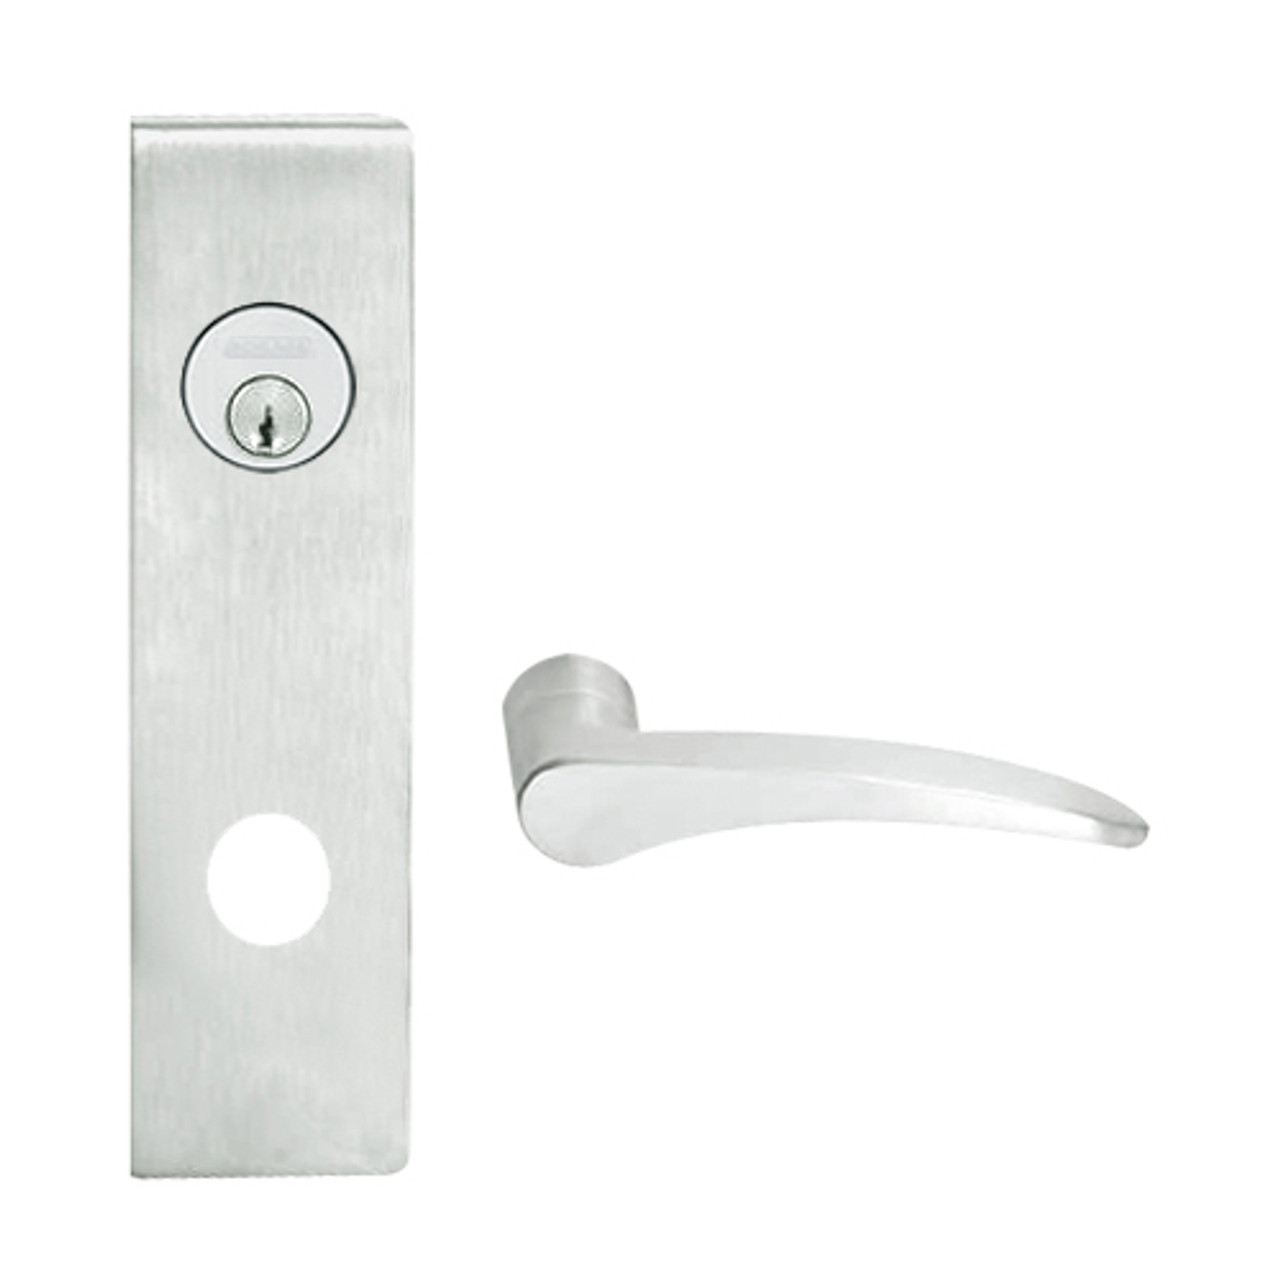 L9026P-12N-619-LH Schlage L Series Exit Lock with Cylinder Commercial Mortise Lock with 12 Cast Lever Design in Satin Nickel